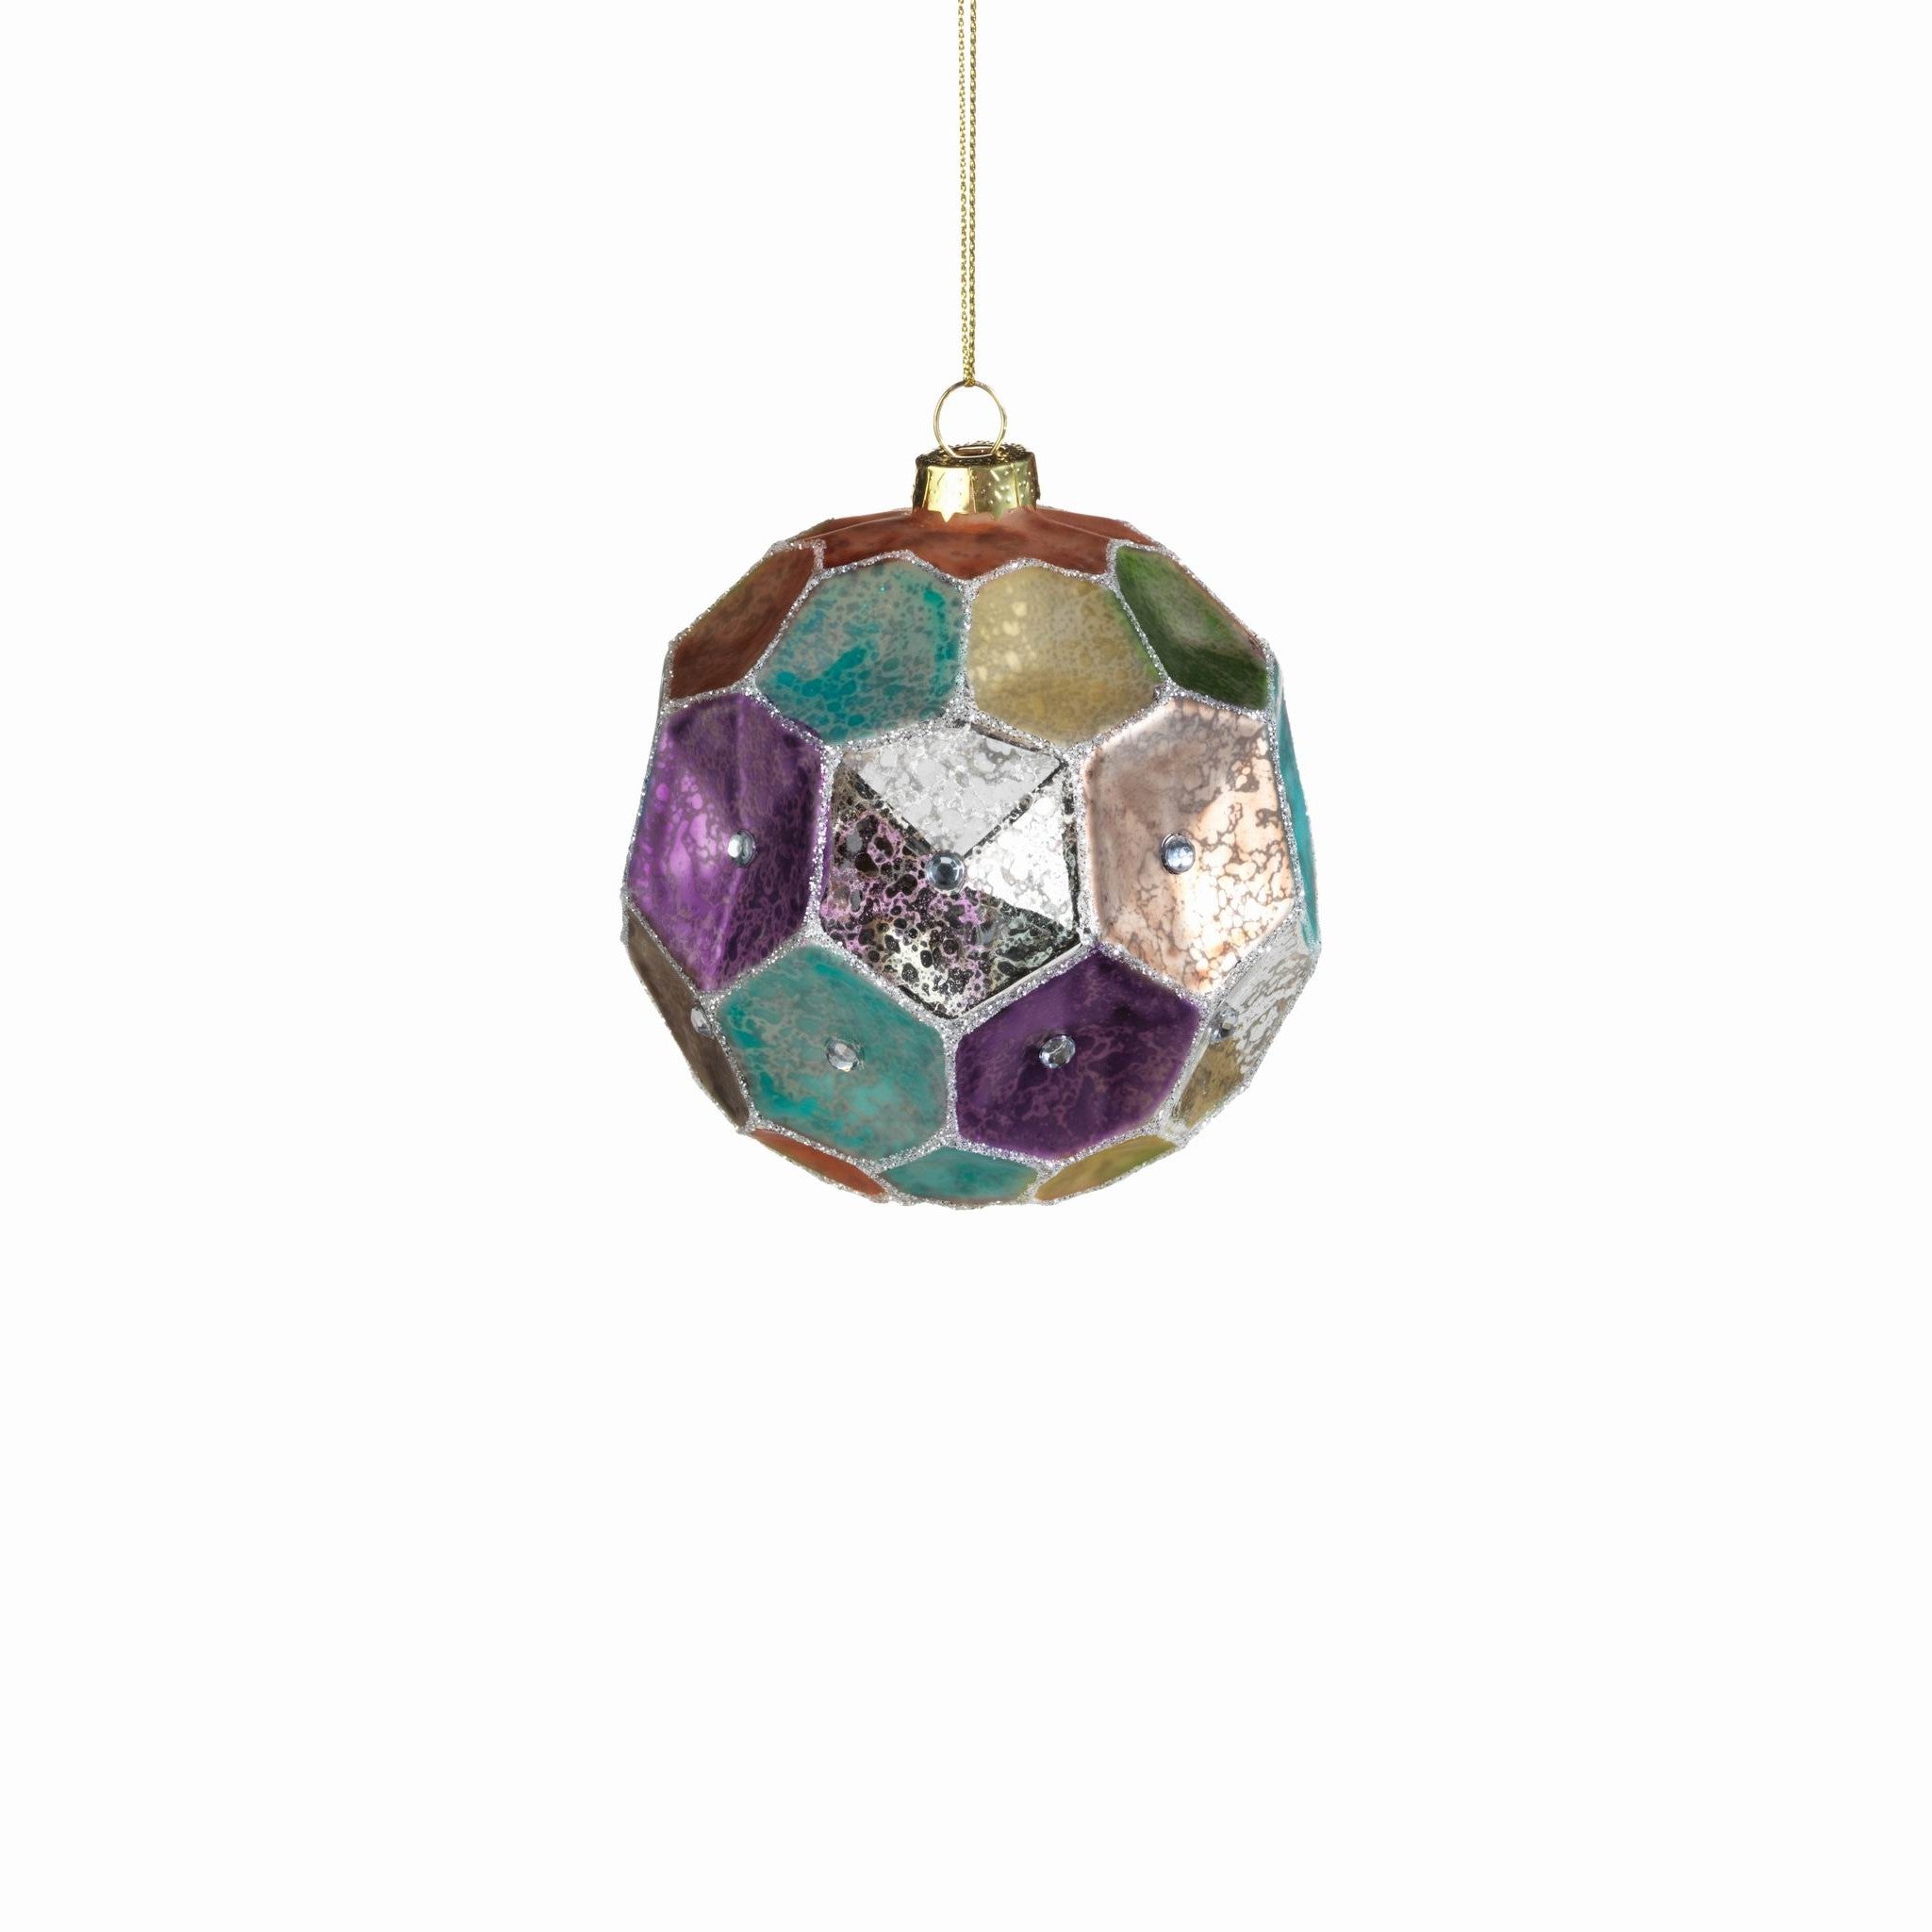 Dimpled Colored Ball Ornament - CARLYLE AVENUE